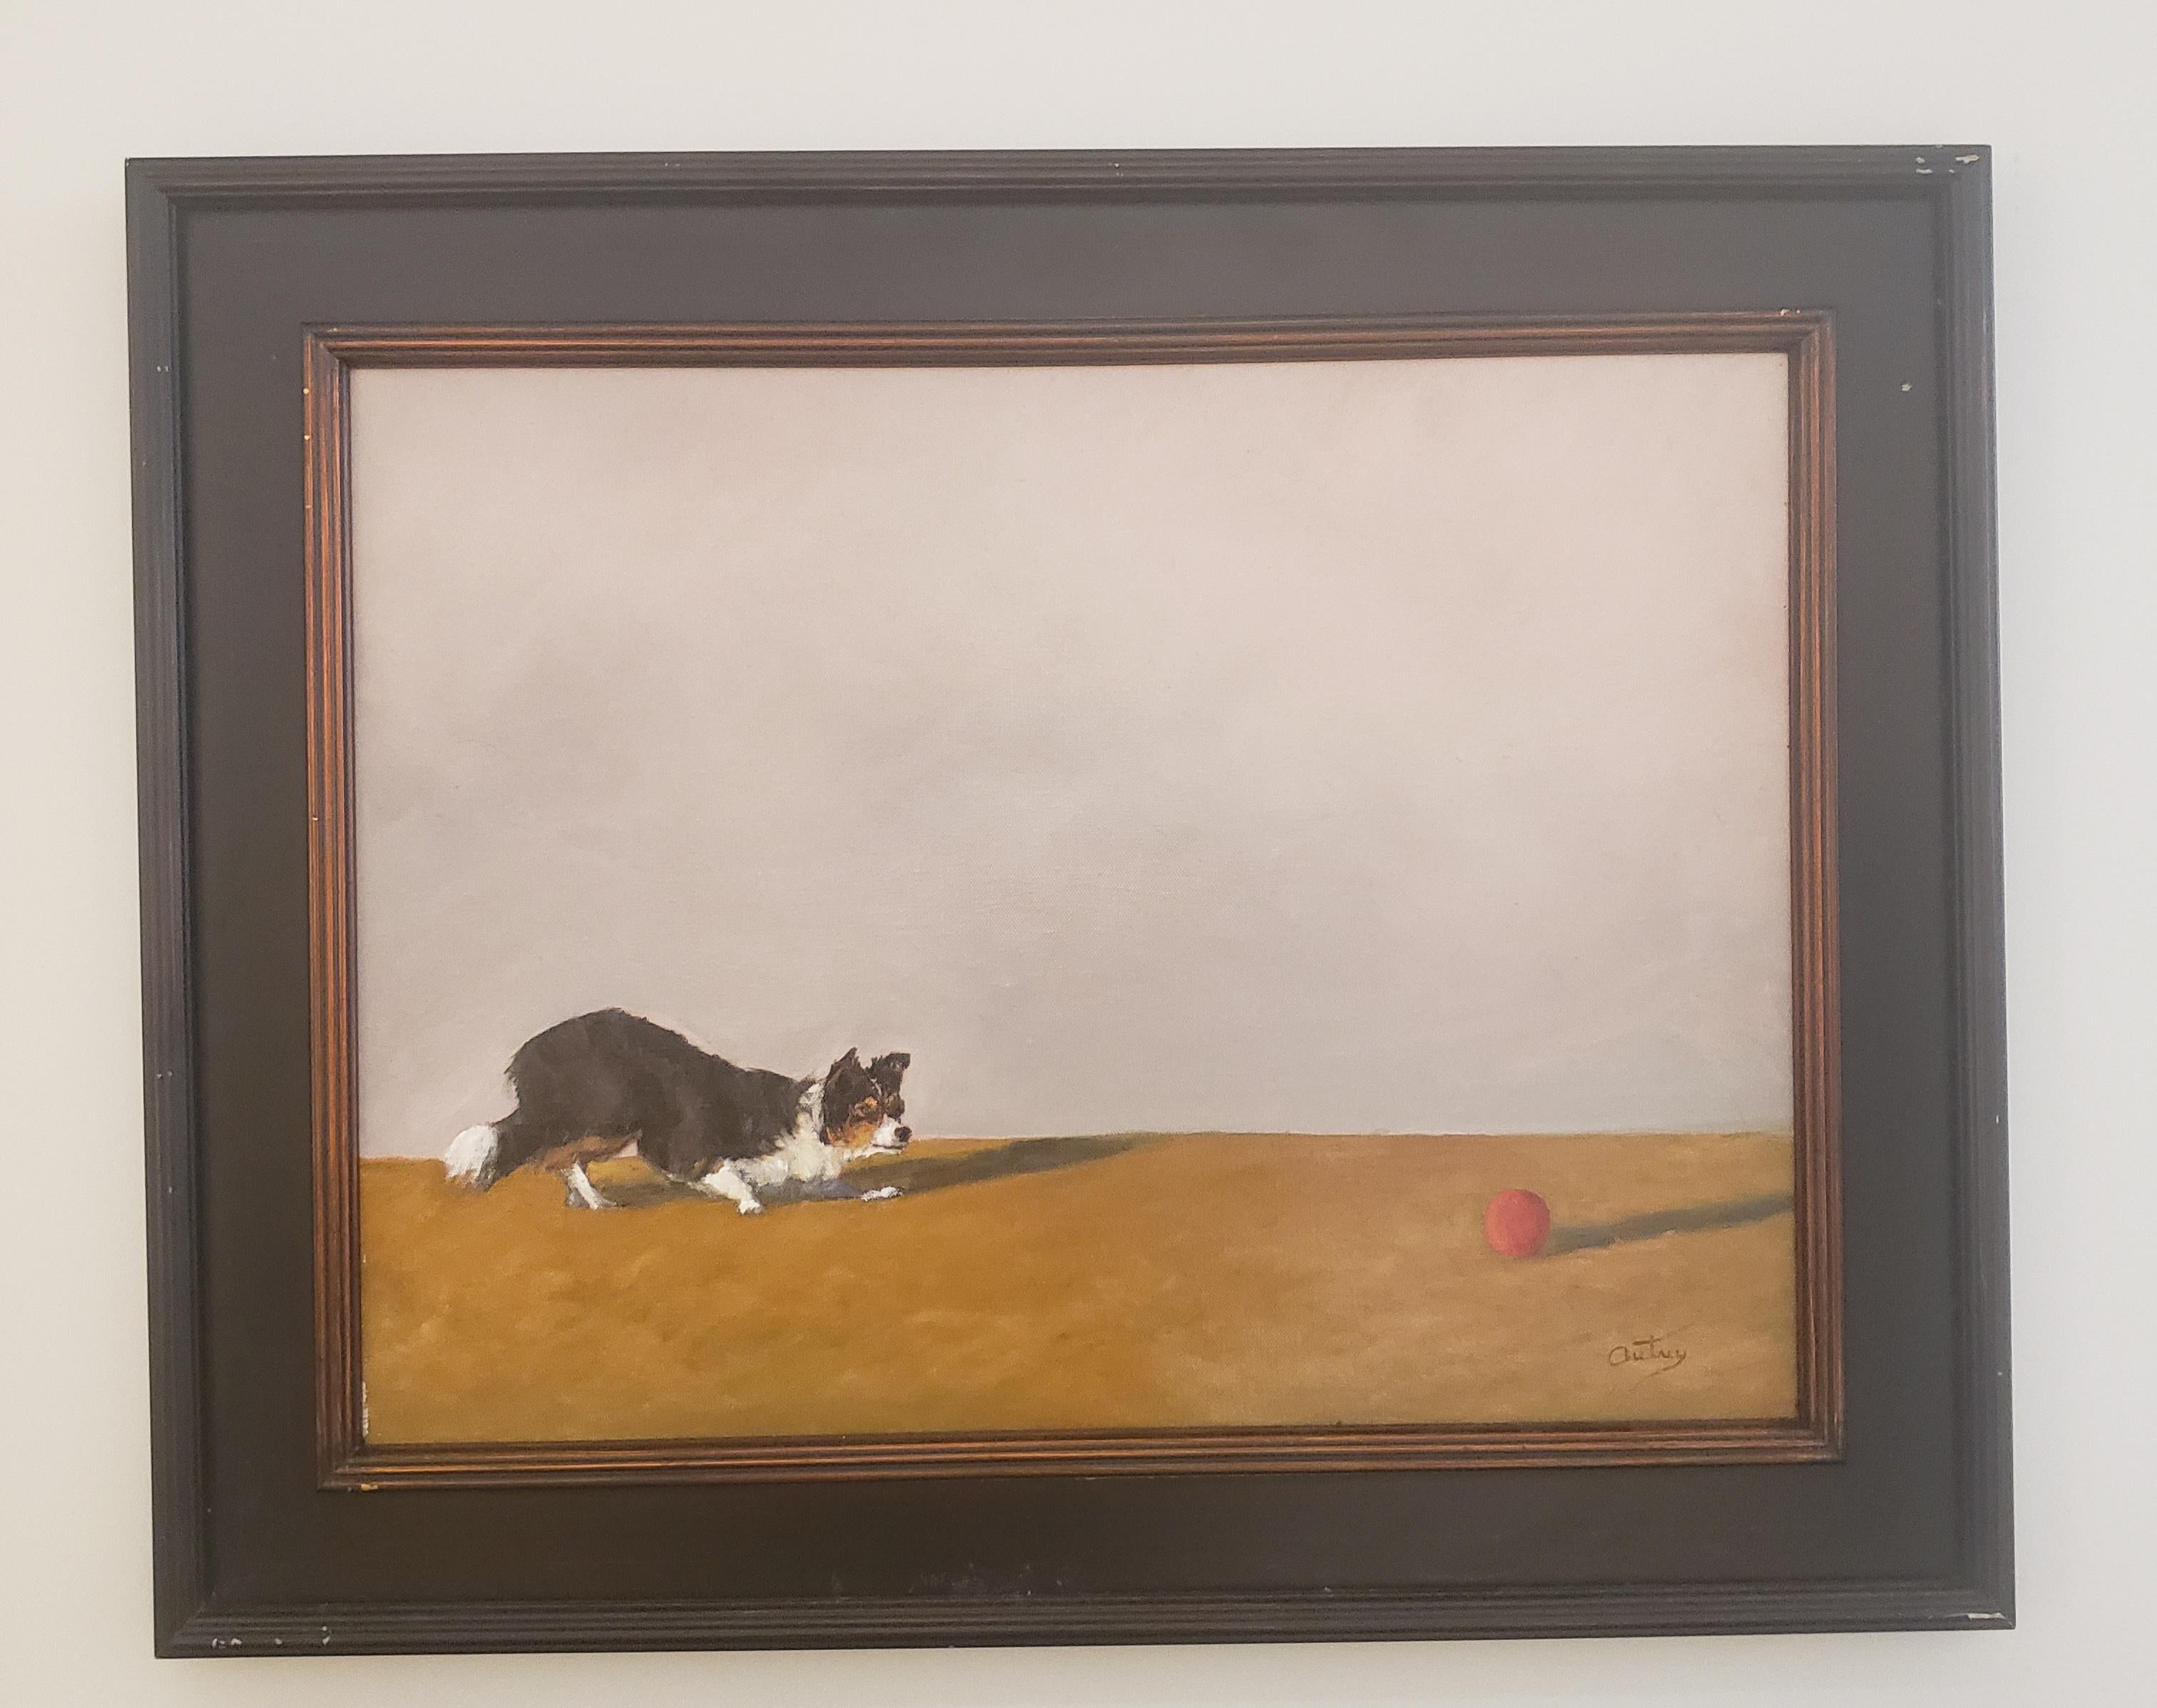 The Red Ball, Texas Artist, Realist, Light and Shadow, Dog Painting, Realism - Brown Figurative Painting by Luke Autrey